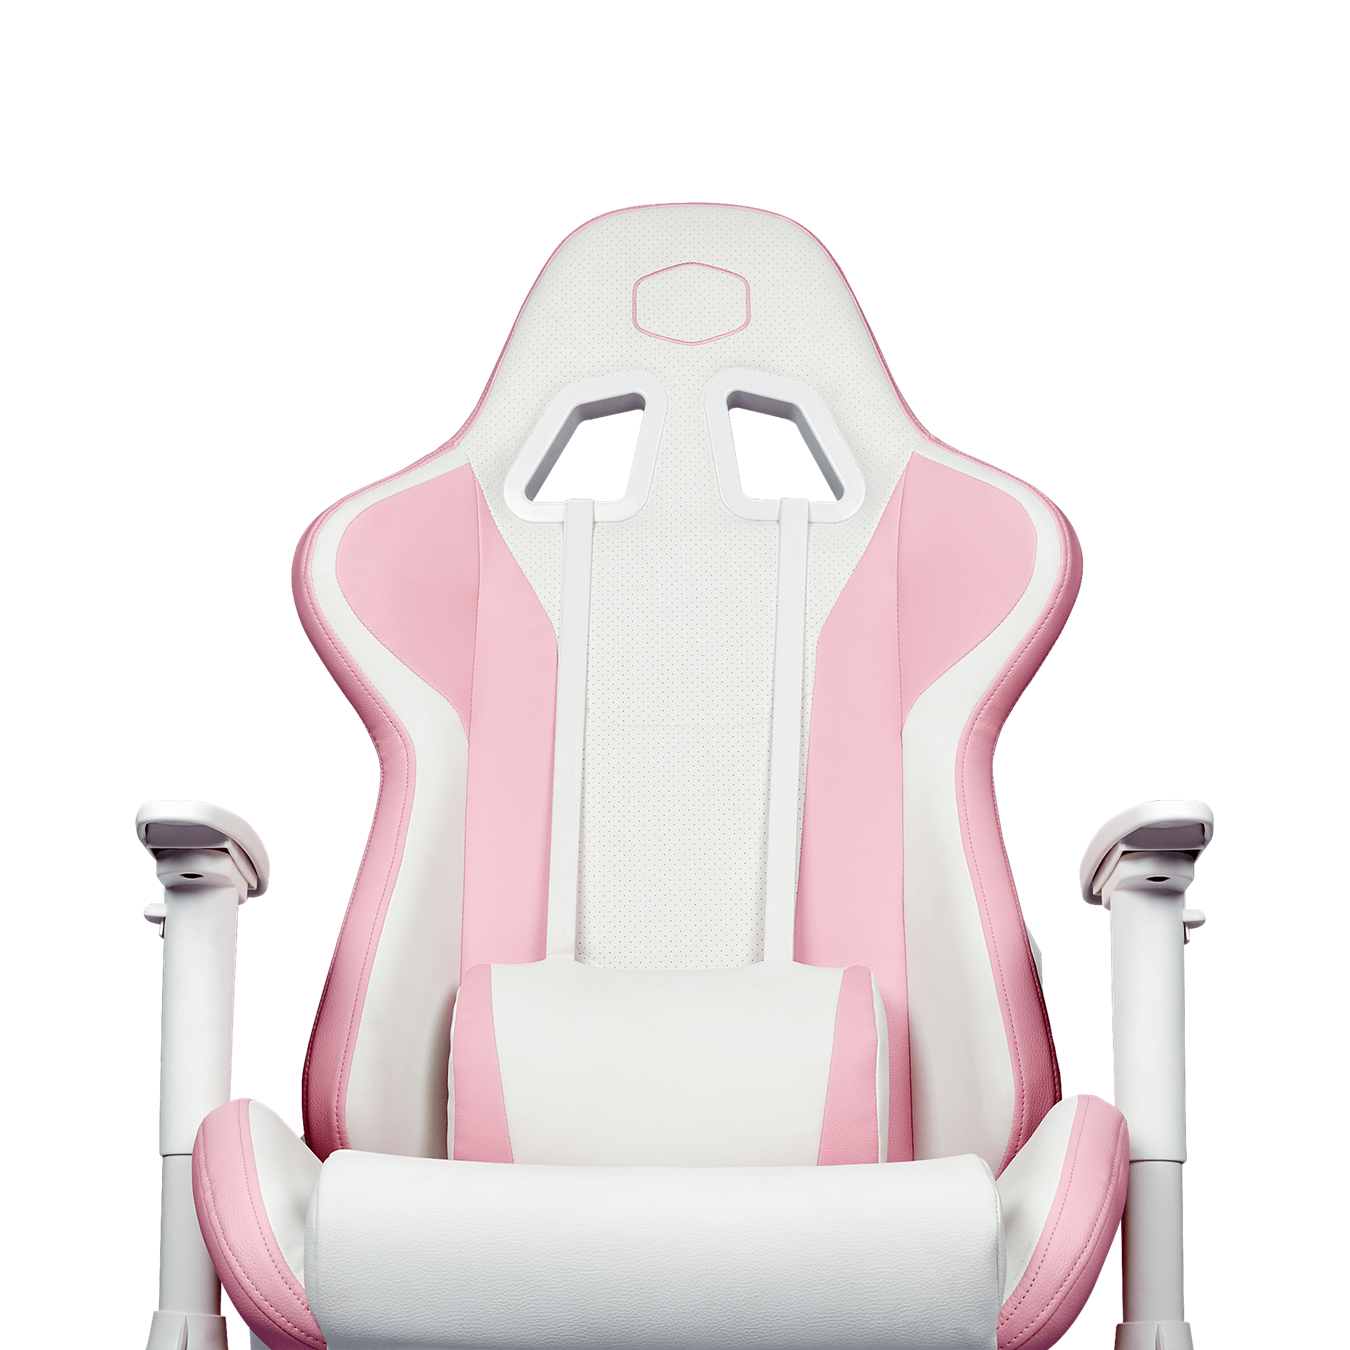 Caliber R1S Rose White Edition Gaming Chair - Premium quality and design sets you apart from the competition. 